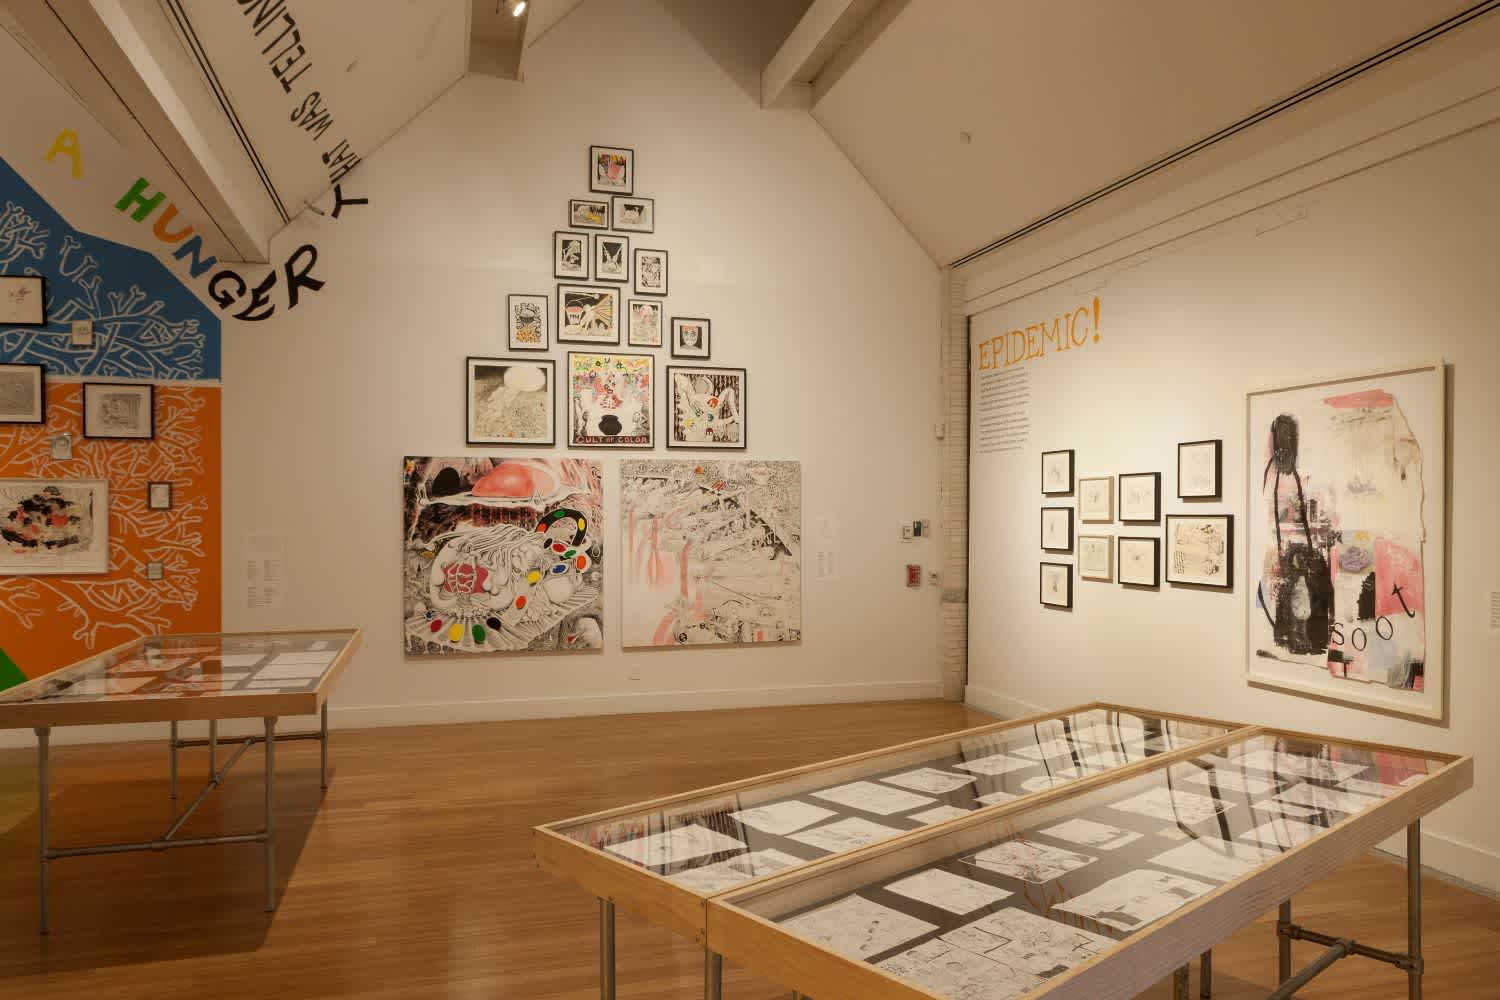 Installation image of Trenton Doyle Hancock: Skin and Bones, 20 Years of Drawing. Contemporary art exhibition at the Virginia Museum of Contemporary Art.